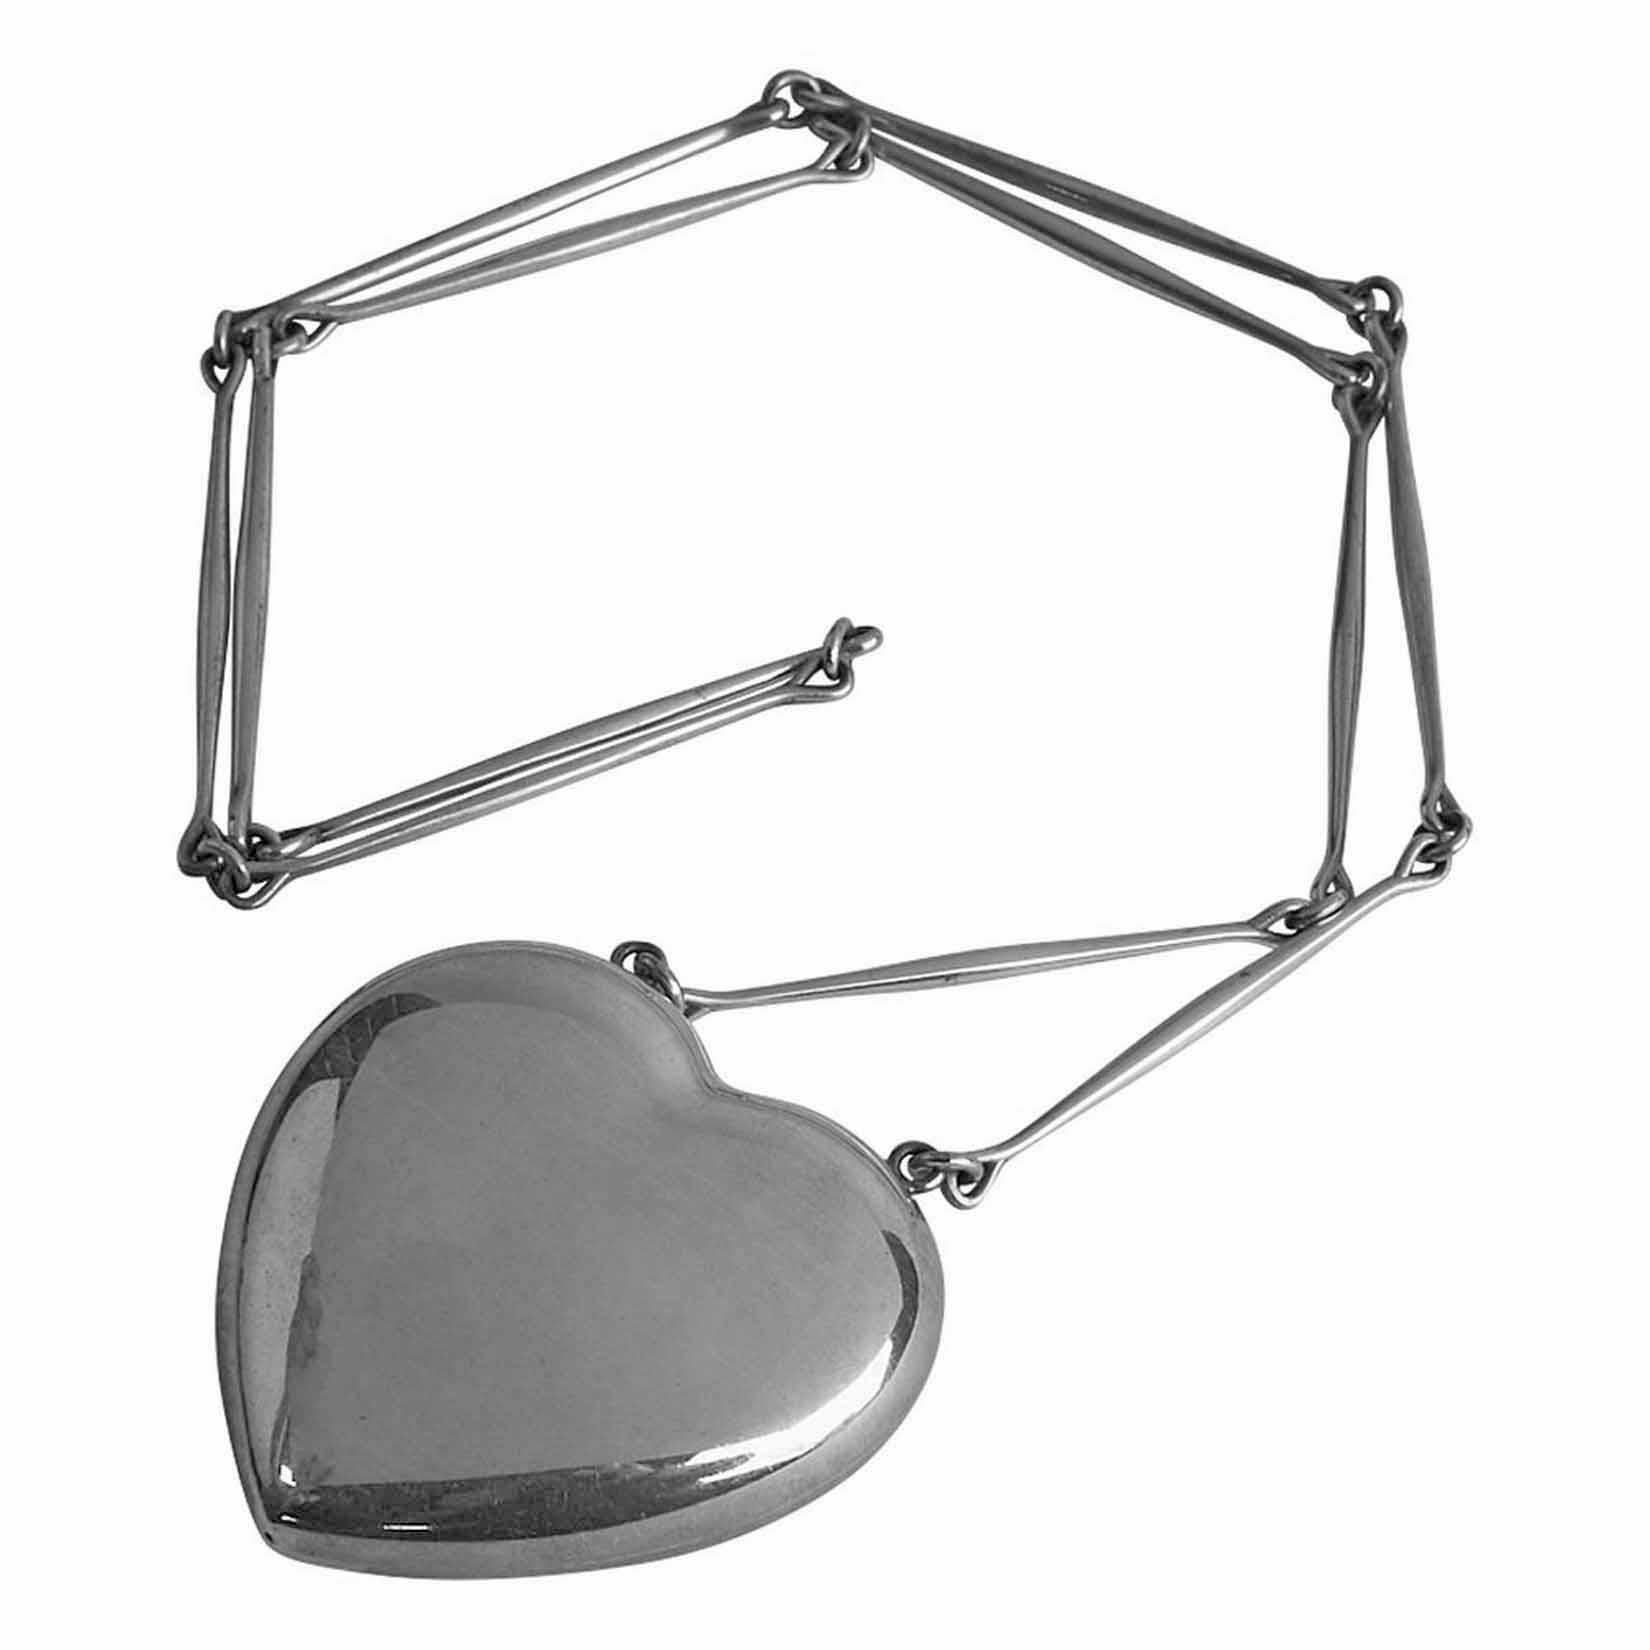 Large Georg Jensen Astrid Fog Joy Pendant Necklace, handmade, design number 126. The large heart pendant suspended from a necklace of twelve bar-form links. Pendant: 2 ½ inches. Necklace: 30 inches. Total Item Weight: 101 grams. Full Jensen marks.